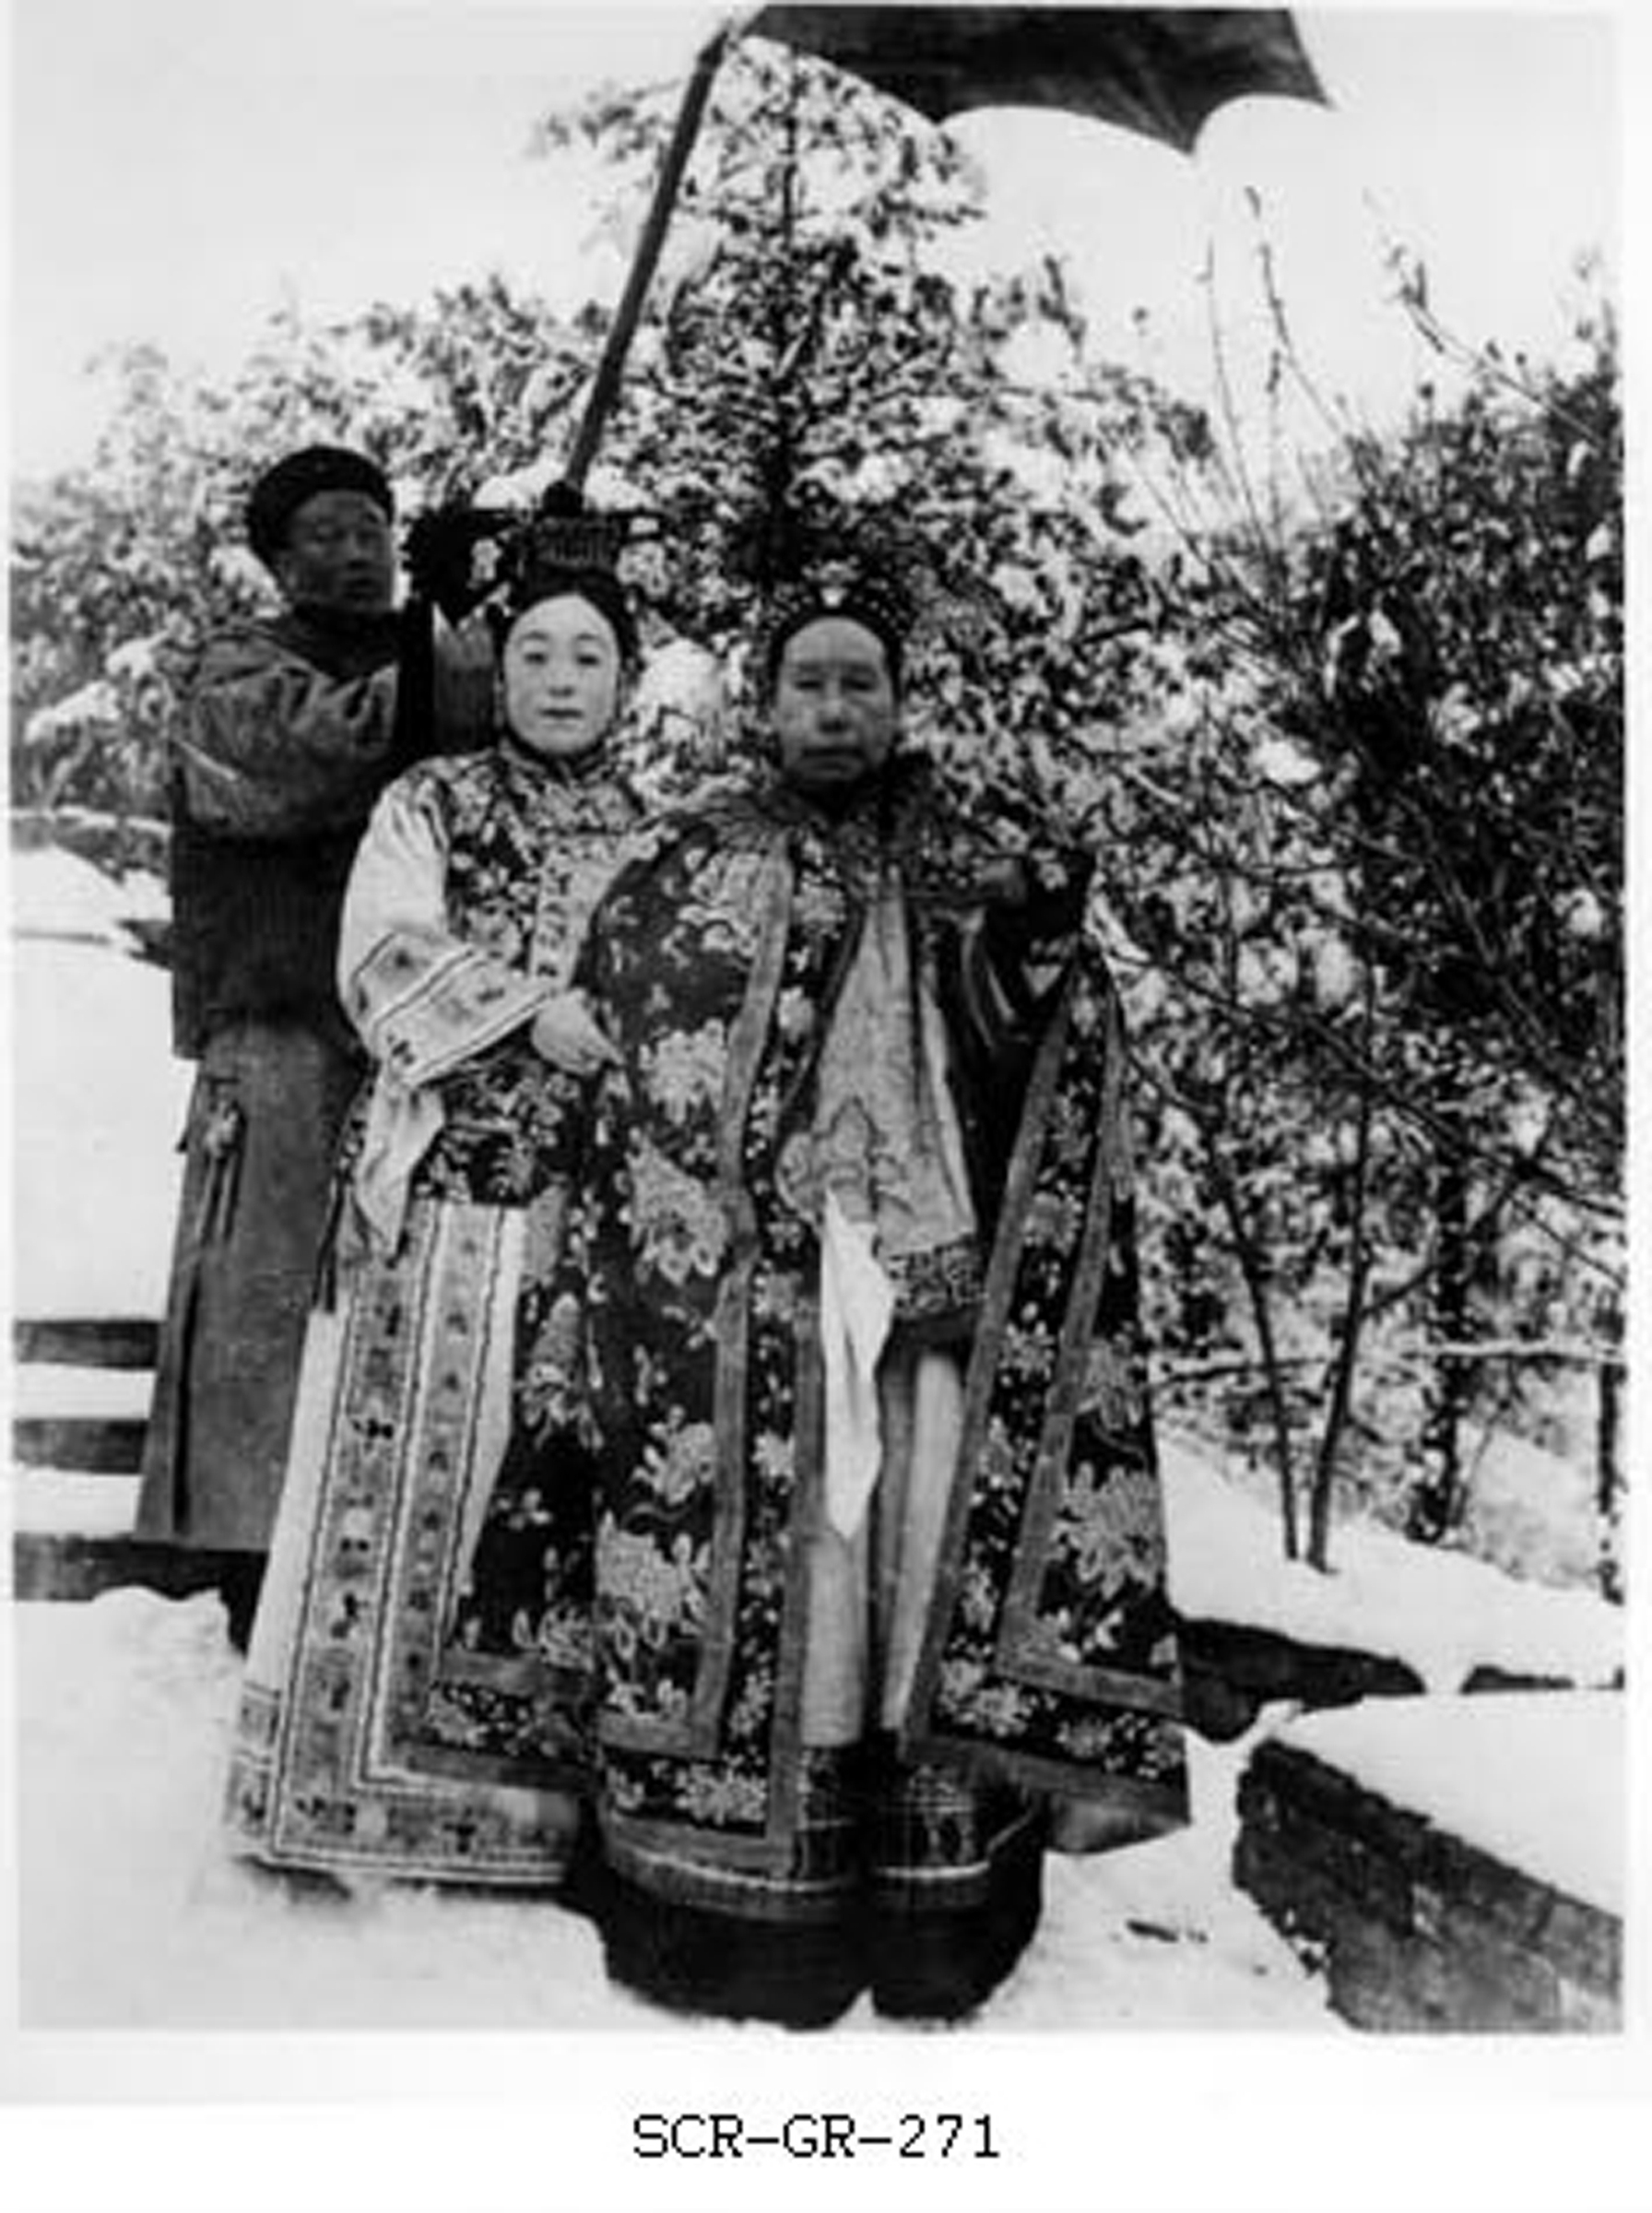 The tomb of Empress Dowager Cixi (right) was looted by a warlord in the 1920s. Photo: Courtesy of Hong Kong University Press